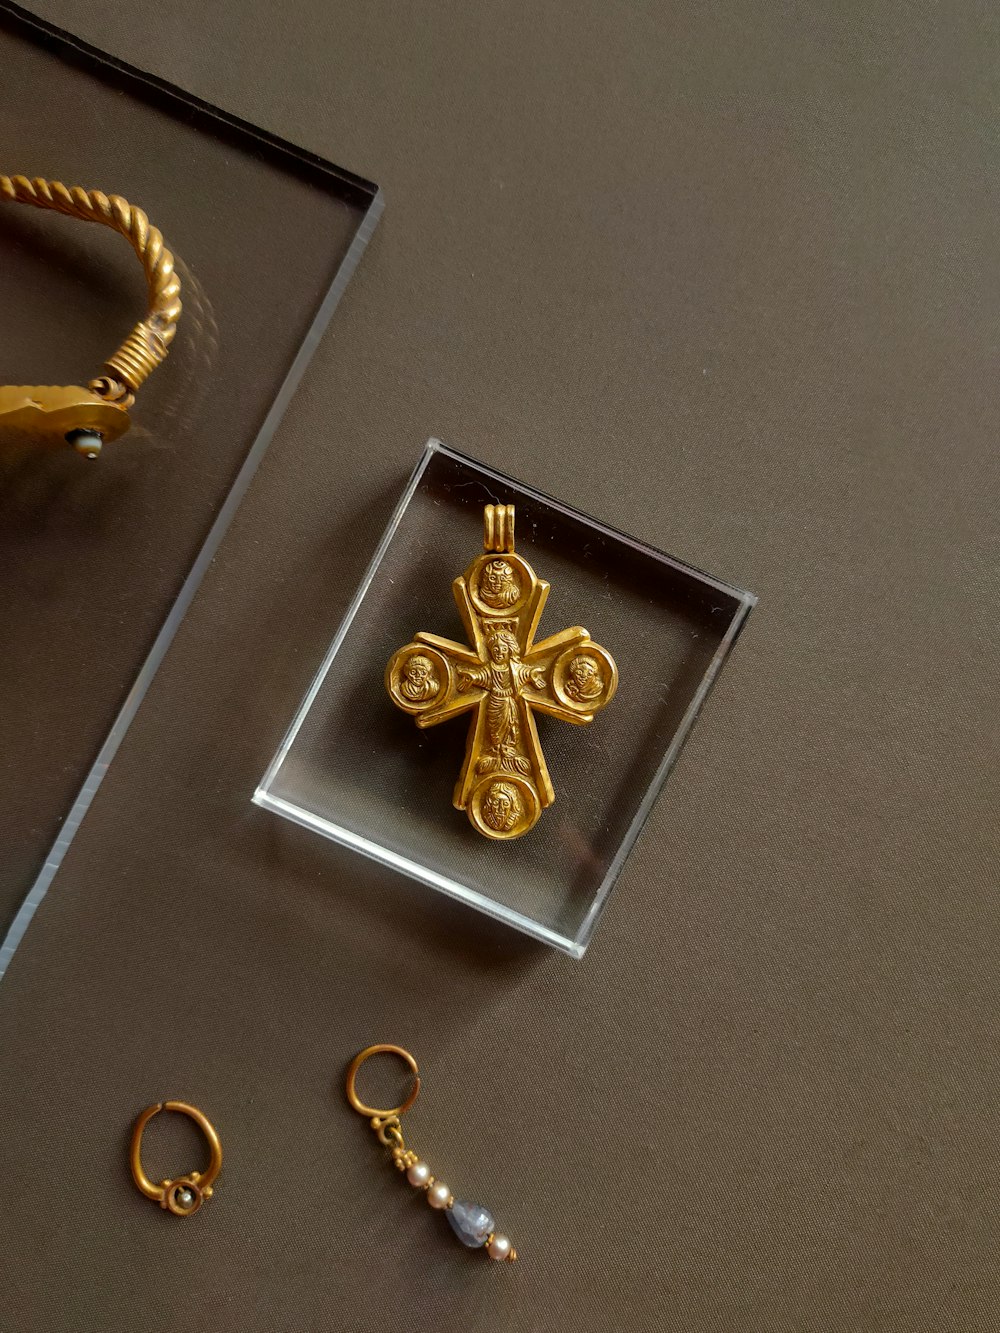 a pair of gold earrings and a gold cross pendant